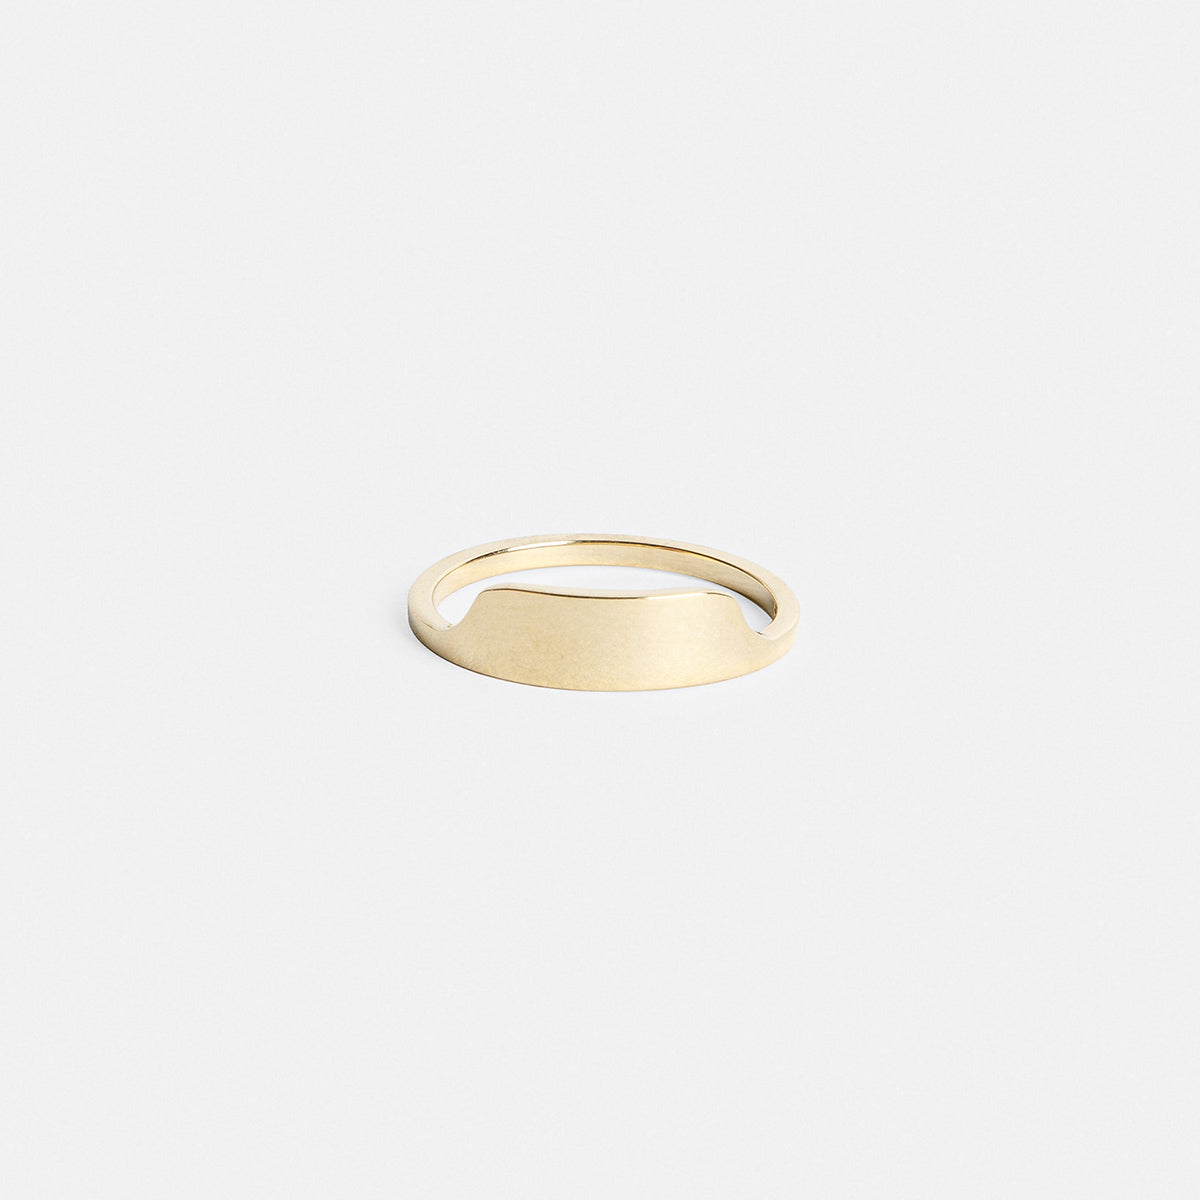 Tylo Unconventional Ring in 14k Gold By SHW Fine Jewelry NYC